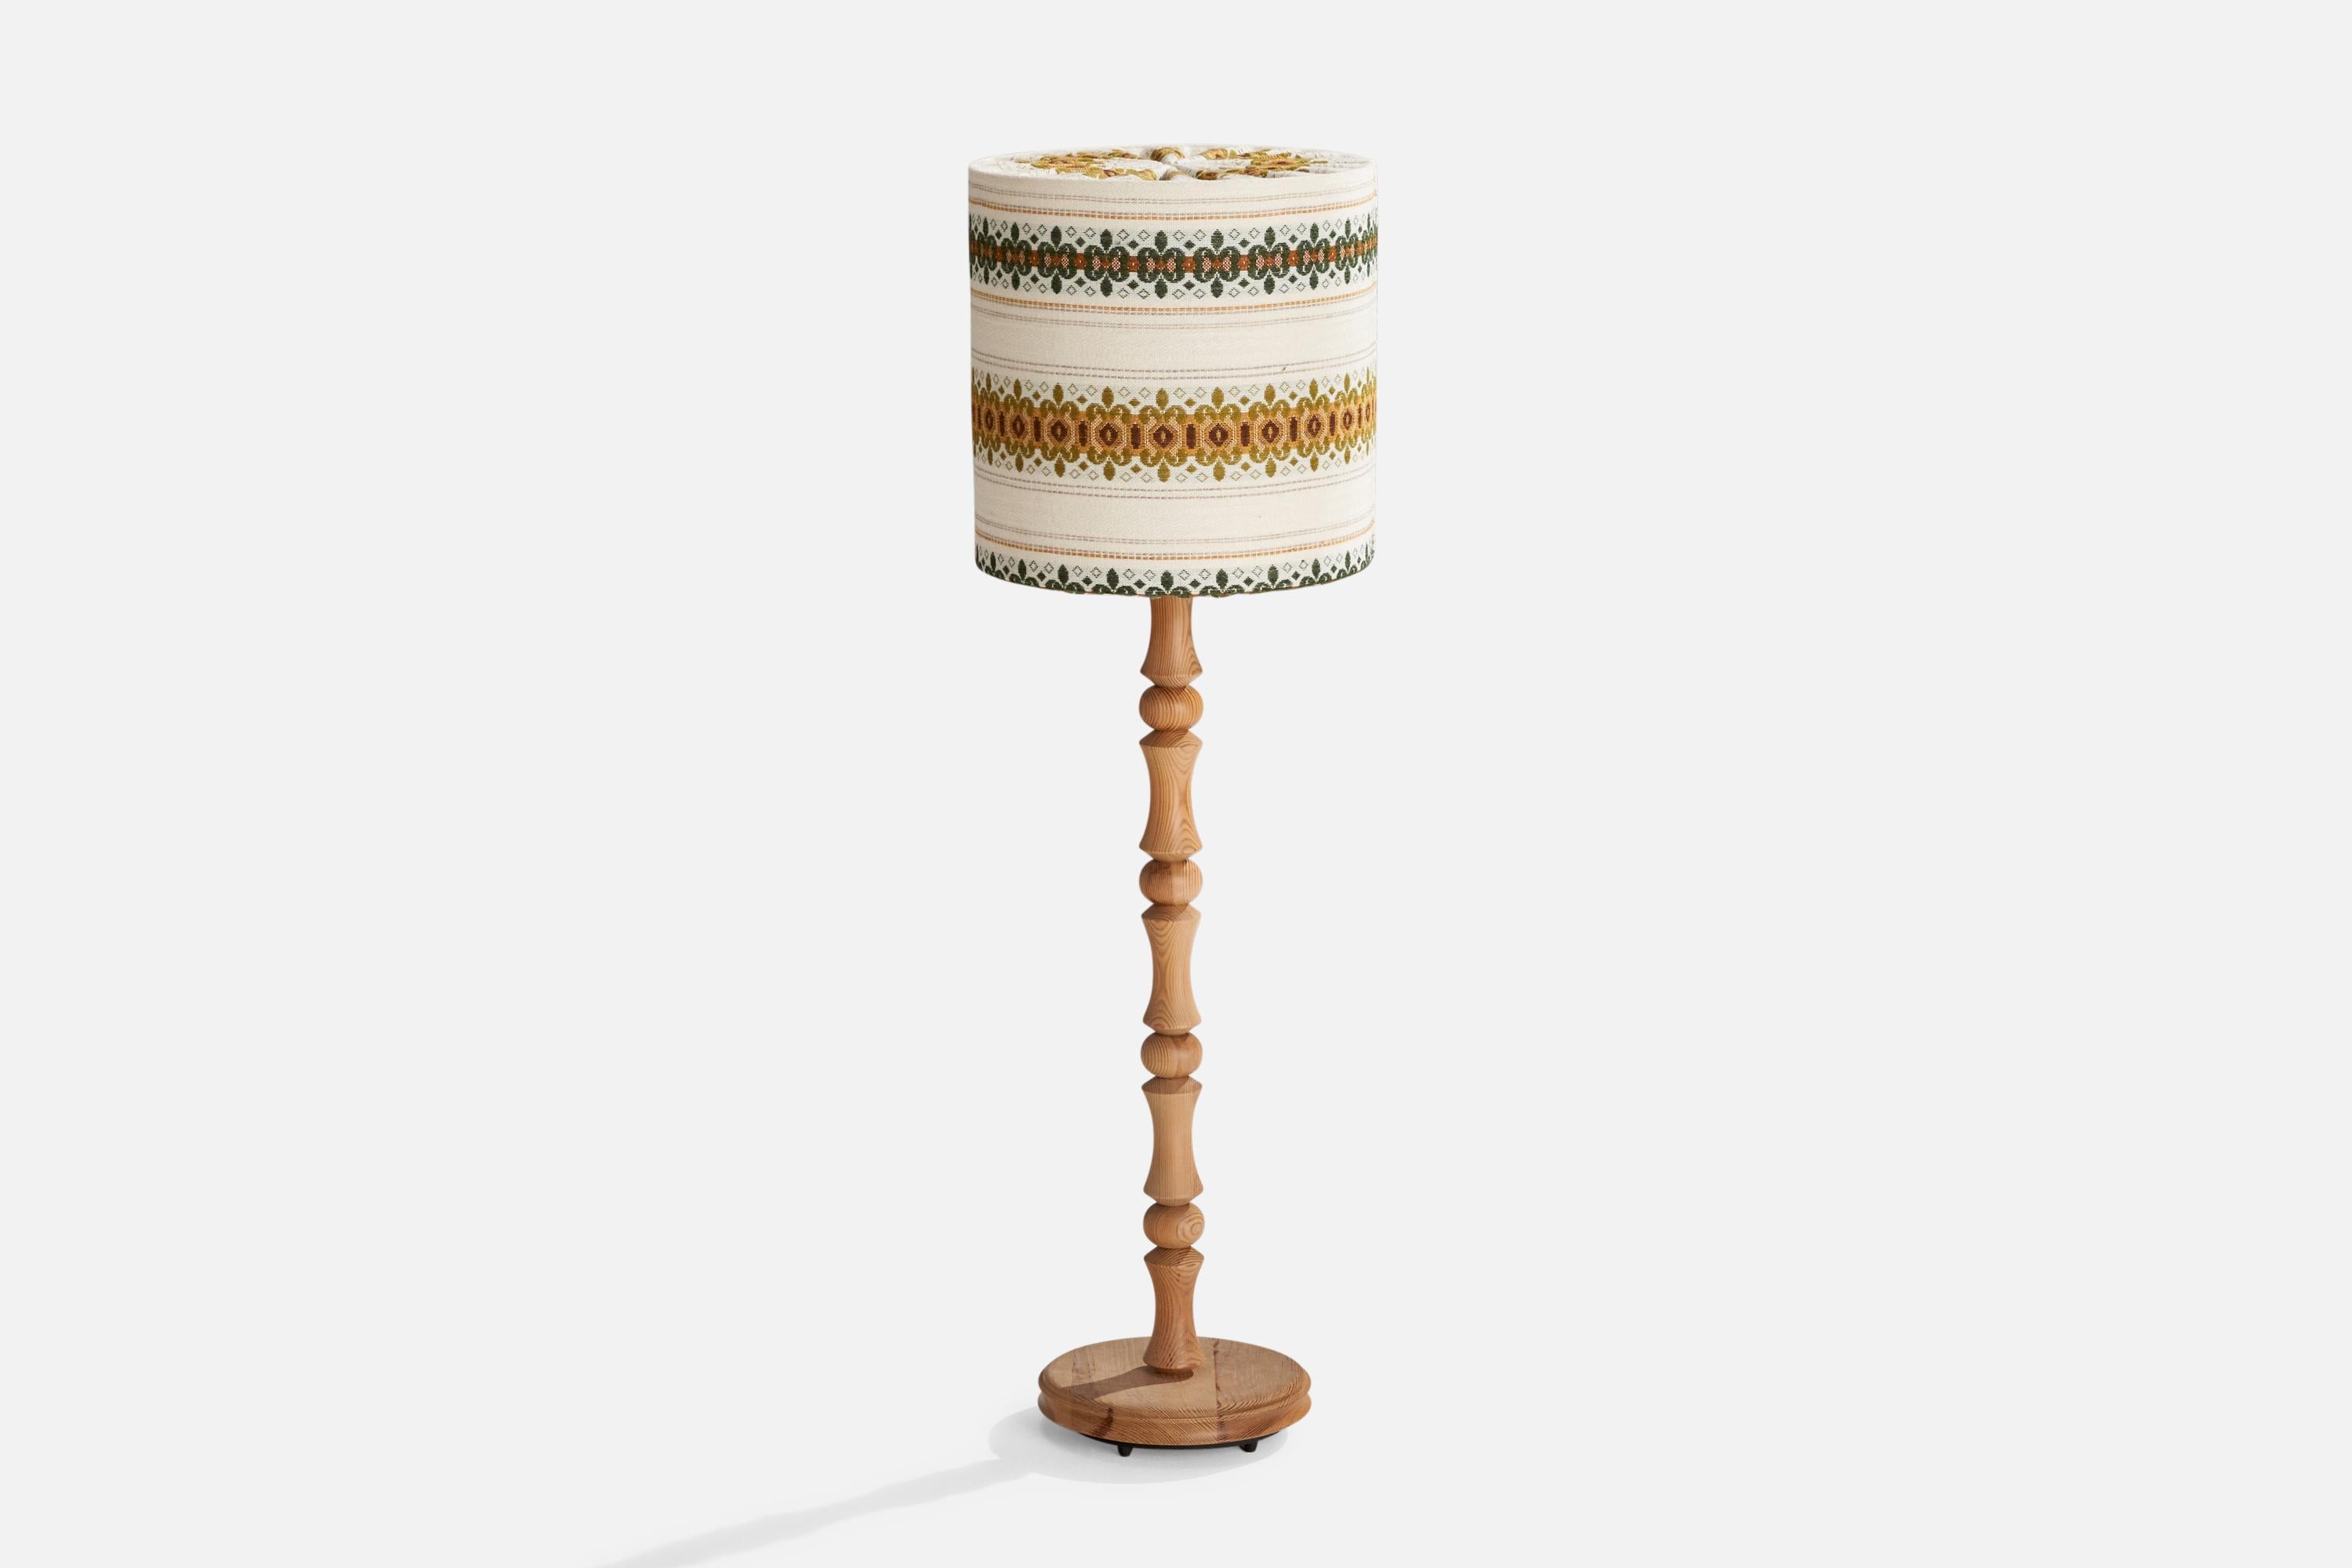 Nybro Armaturfabrik, Small Floor Lamps, Pine, Fabric, Sweden, 1970s In Good Condition For Sale In High Point, NC